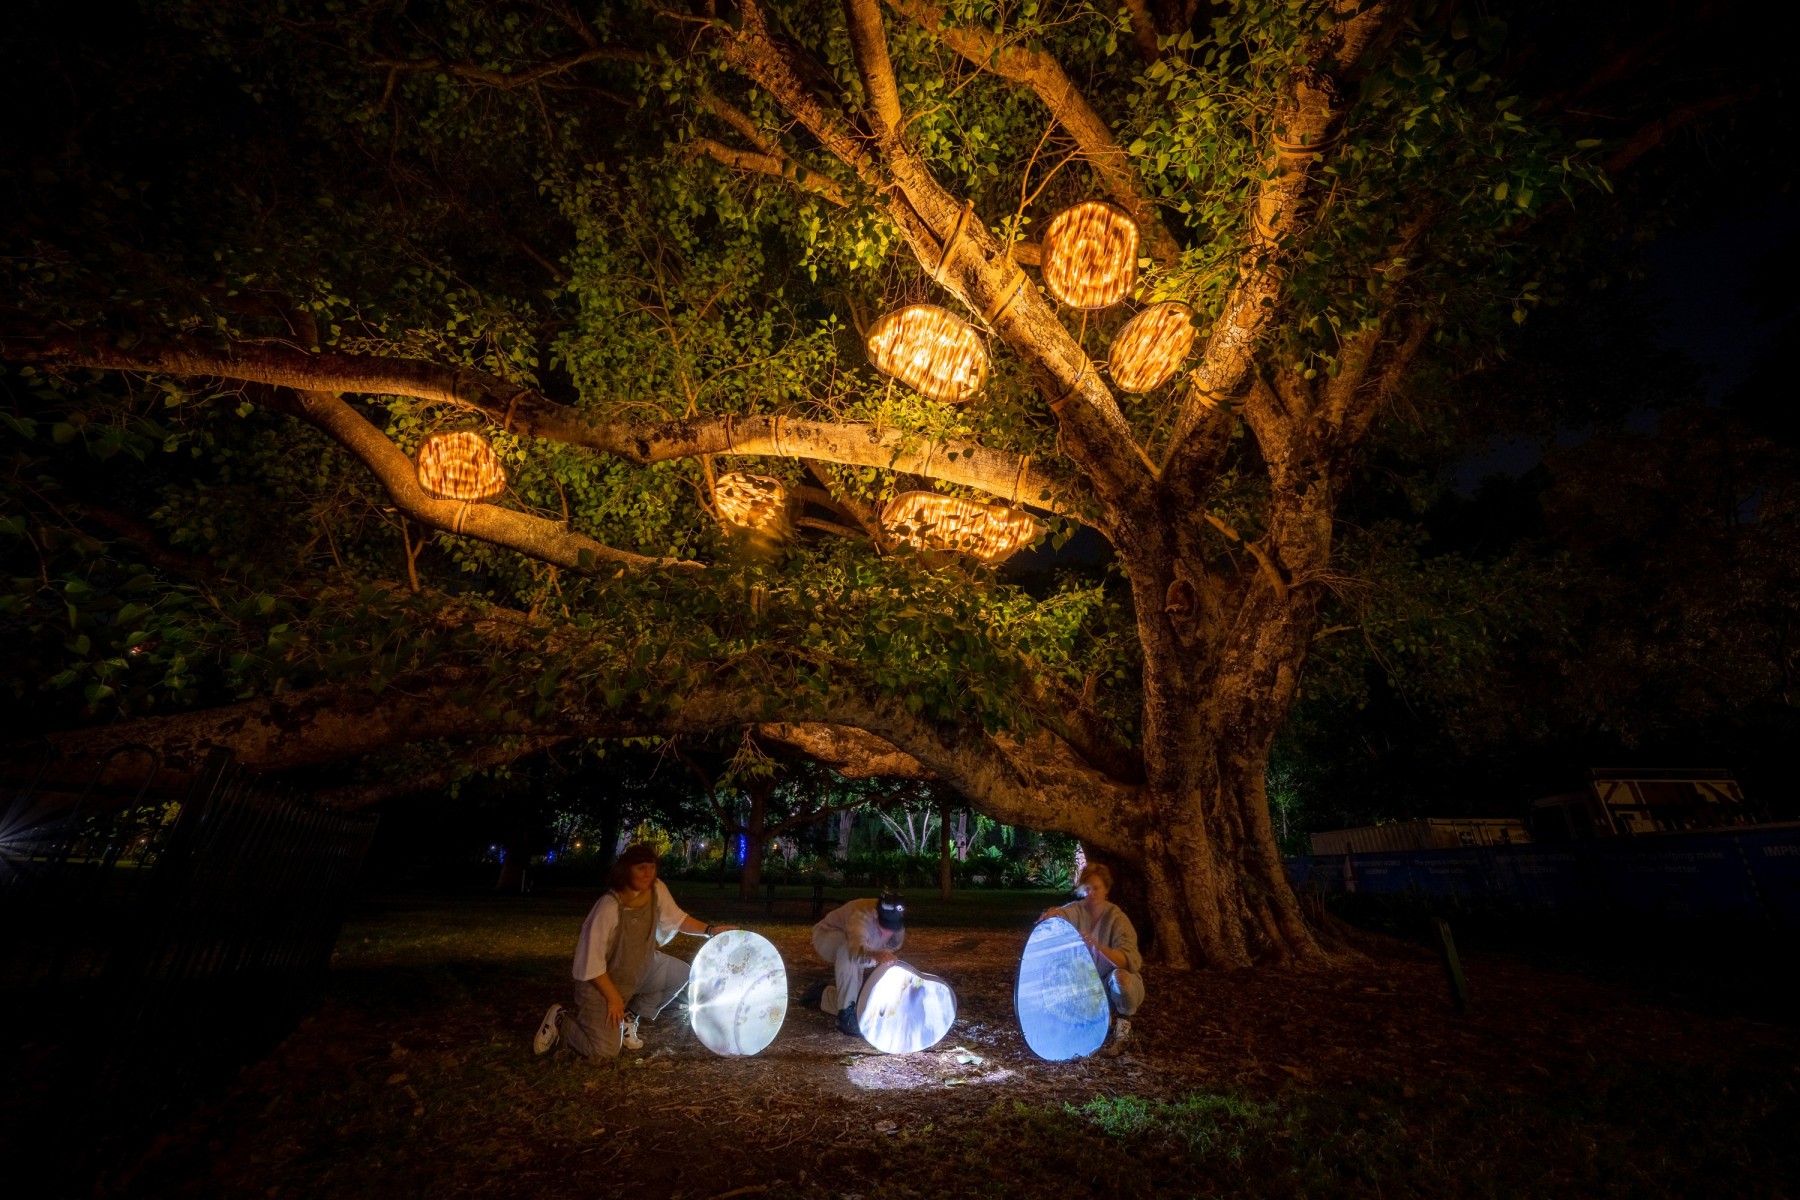 Three people crouch beneath a large tree strung with five ovular ceramics, setting up reflective panels onto which microscopic waterlife has been projected